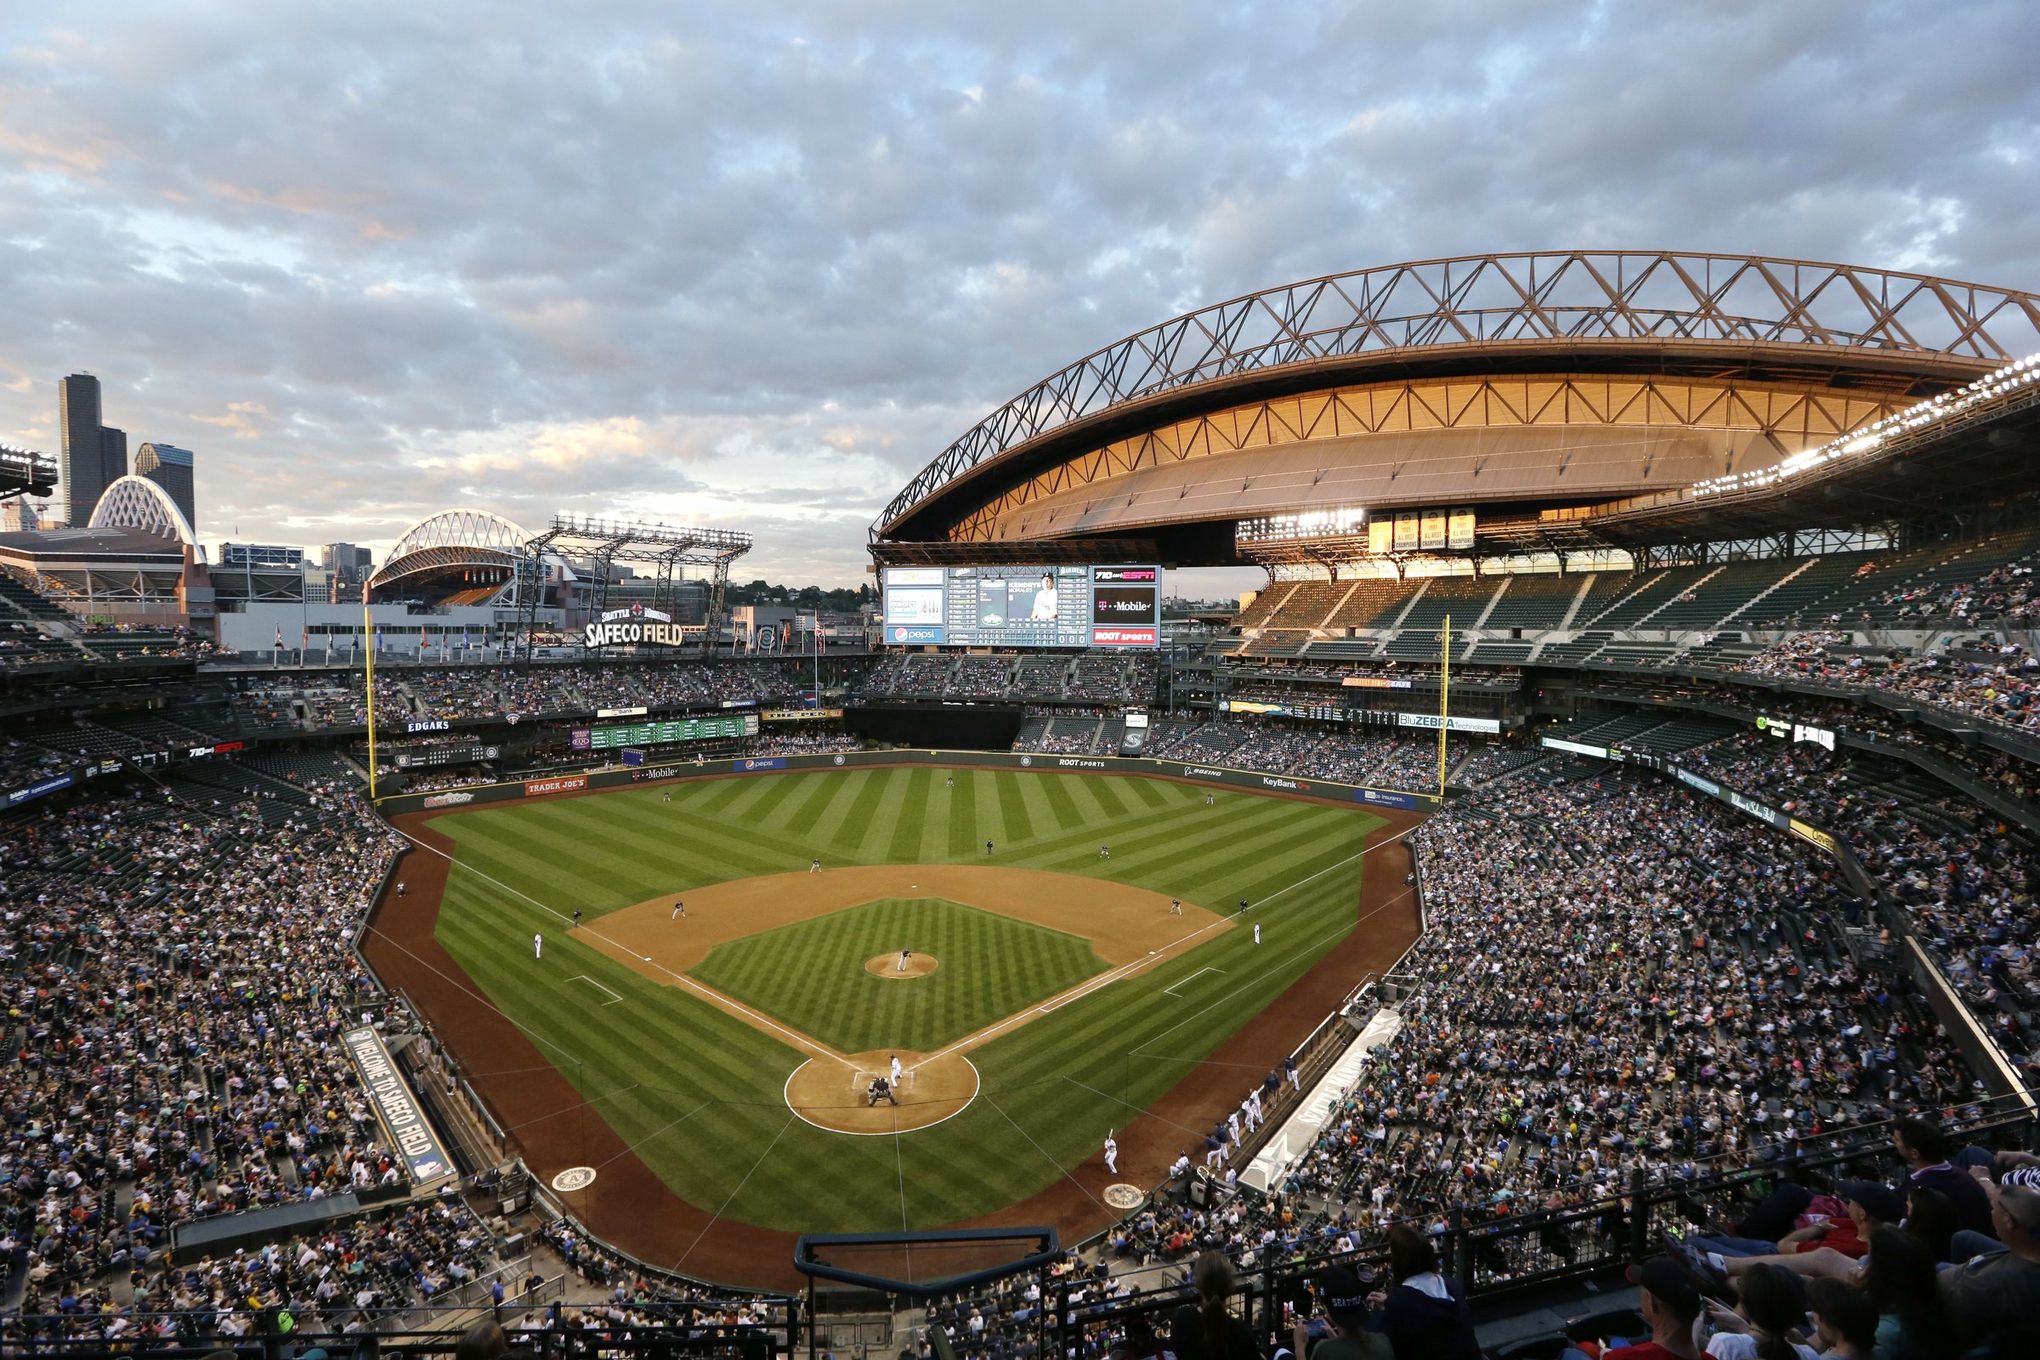 Lawsuit Alleges Ada Violations At Safeco Field The Seattle Times